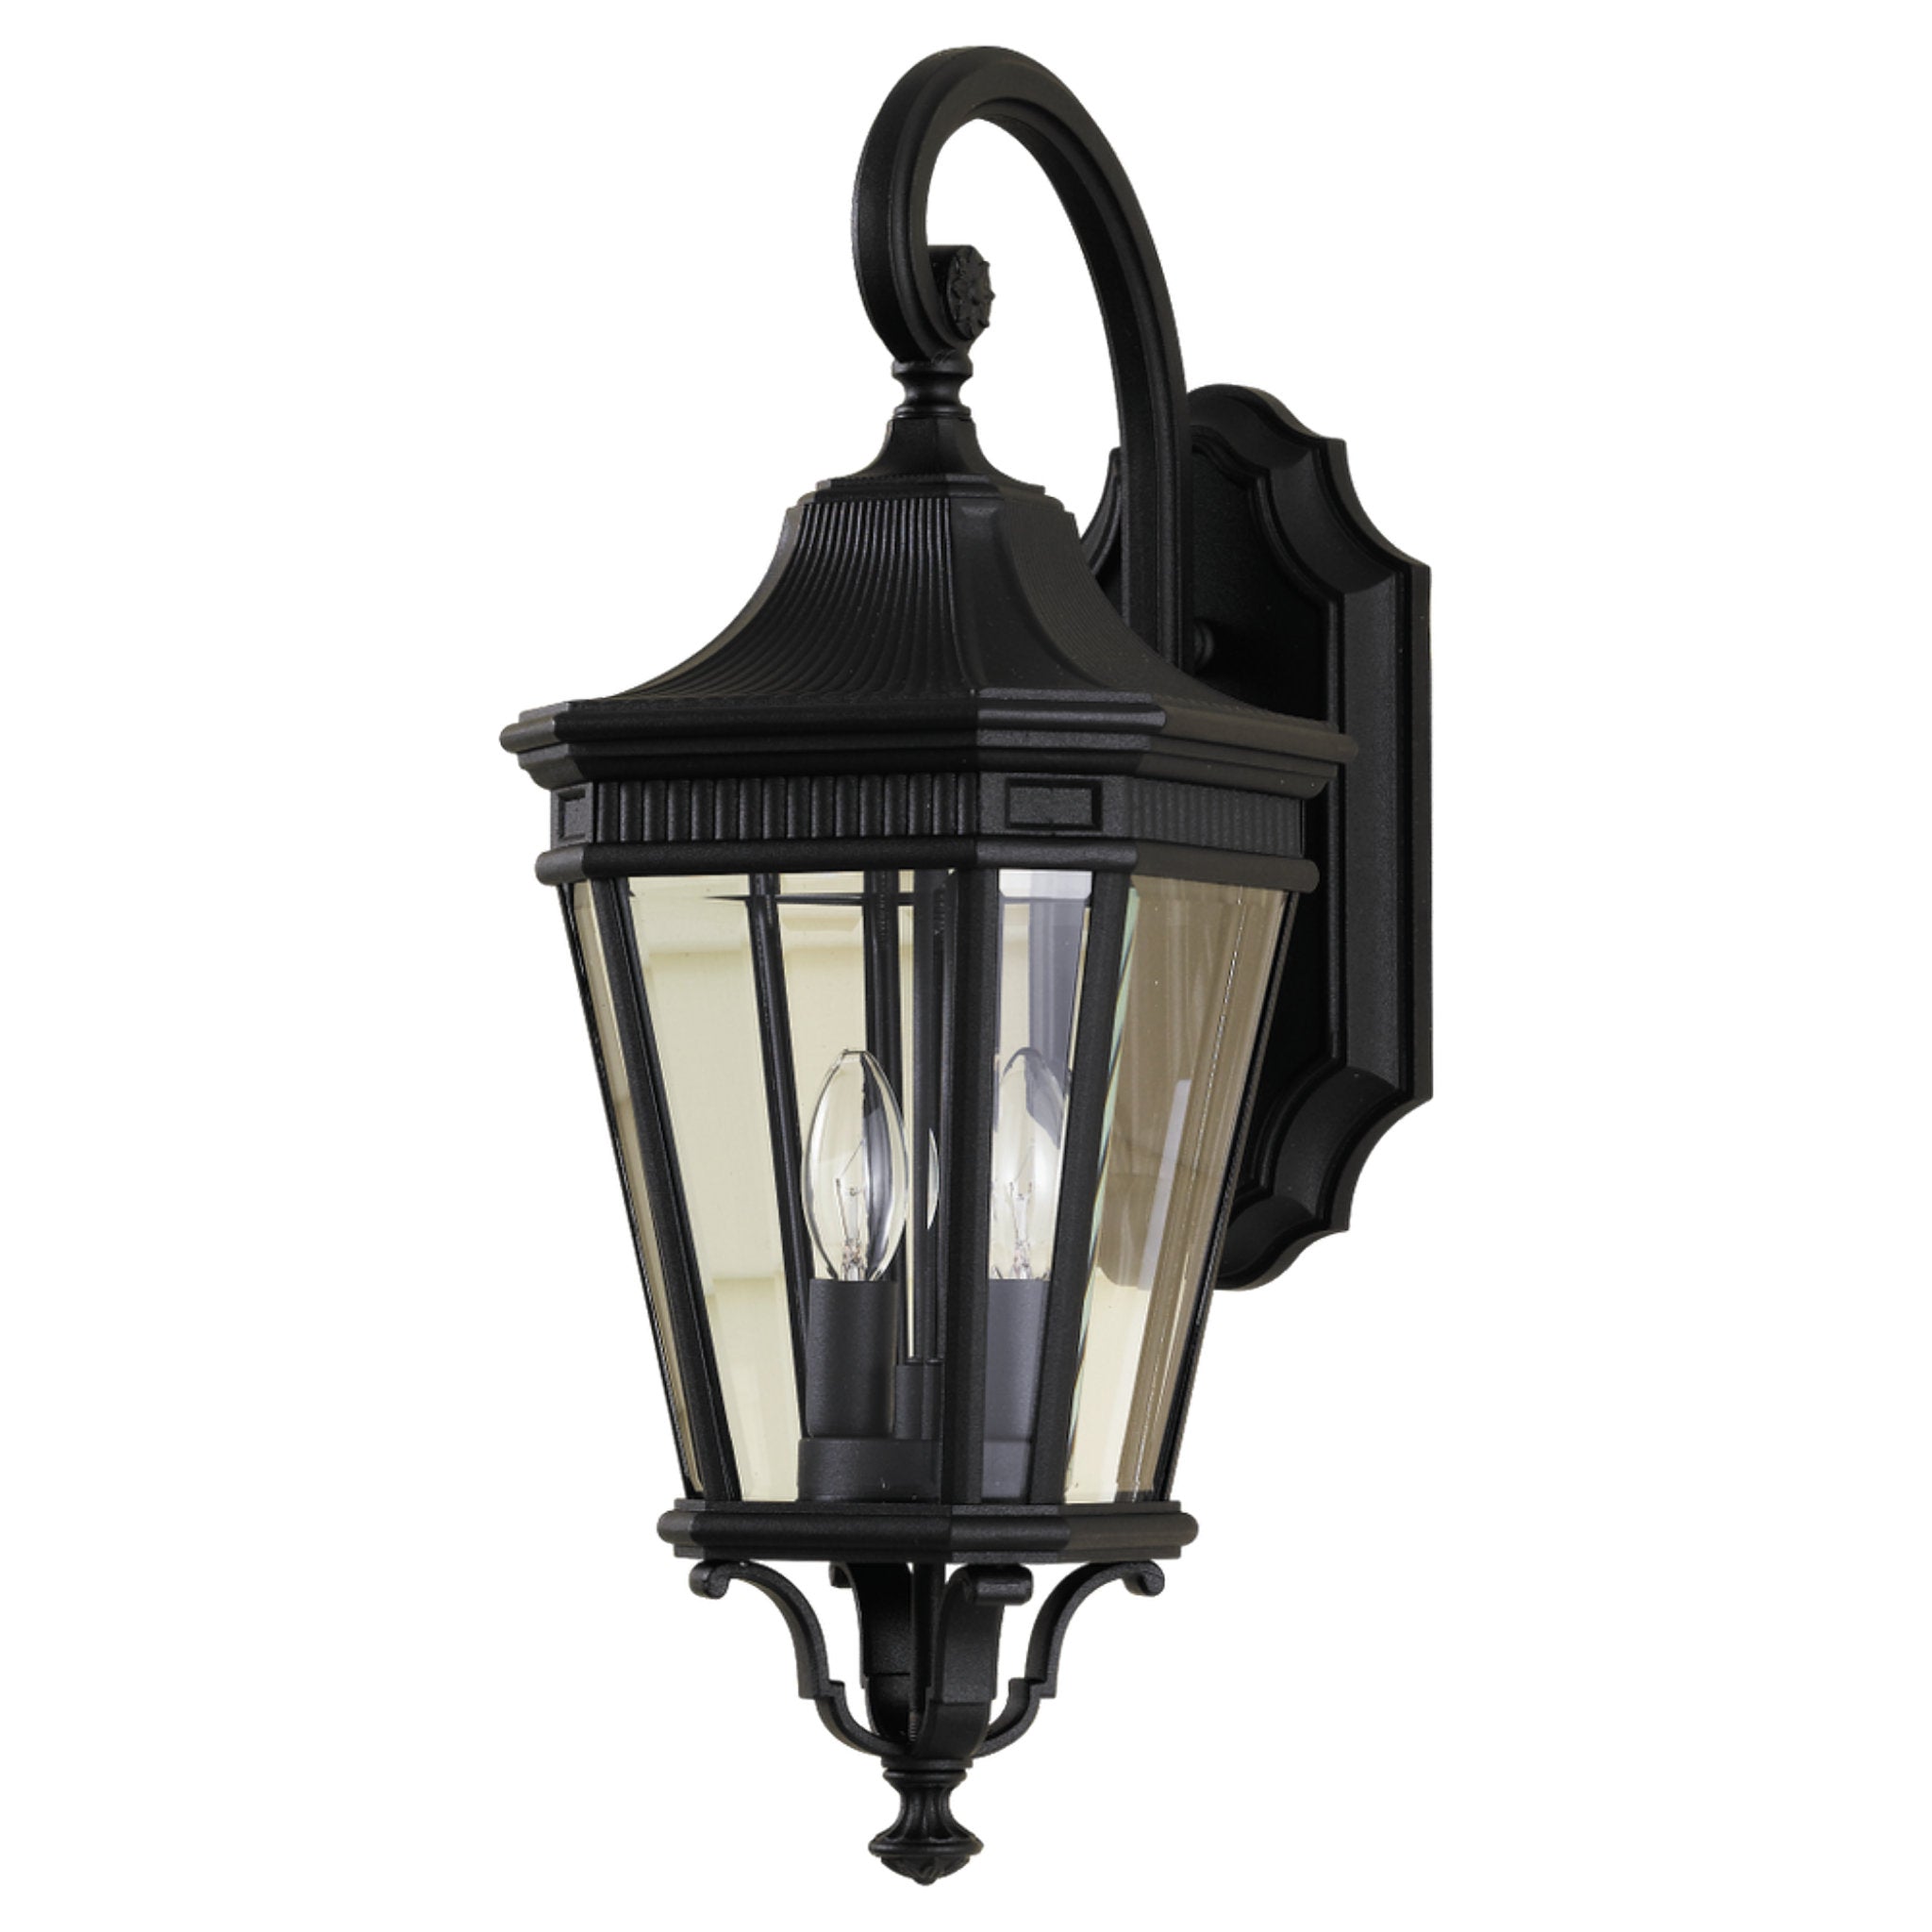 Cotswold Lane Small Lantern Traditional Outdoor Fixture 9" Width 20.5" Height Aluminum Irregular Clear Beveled Shade in Black